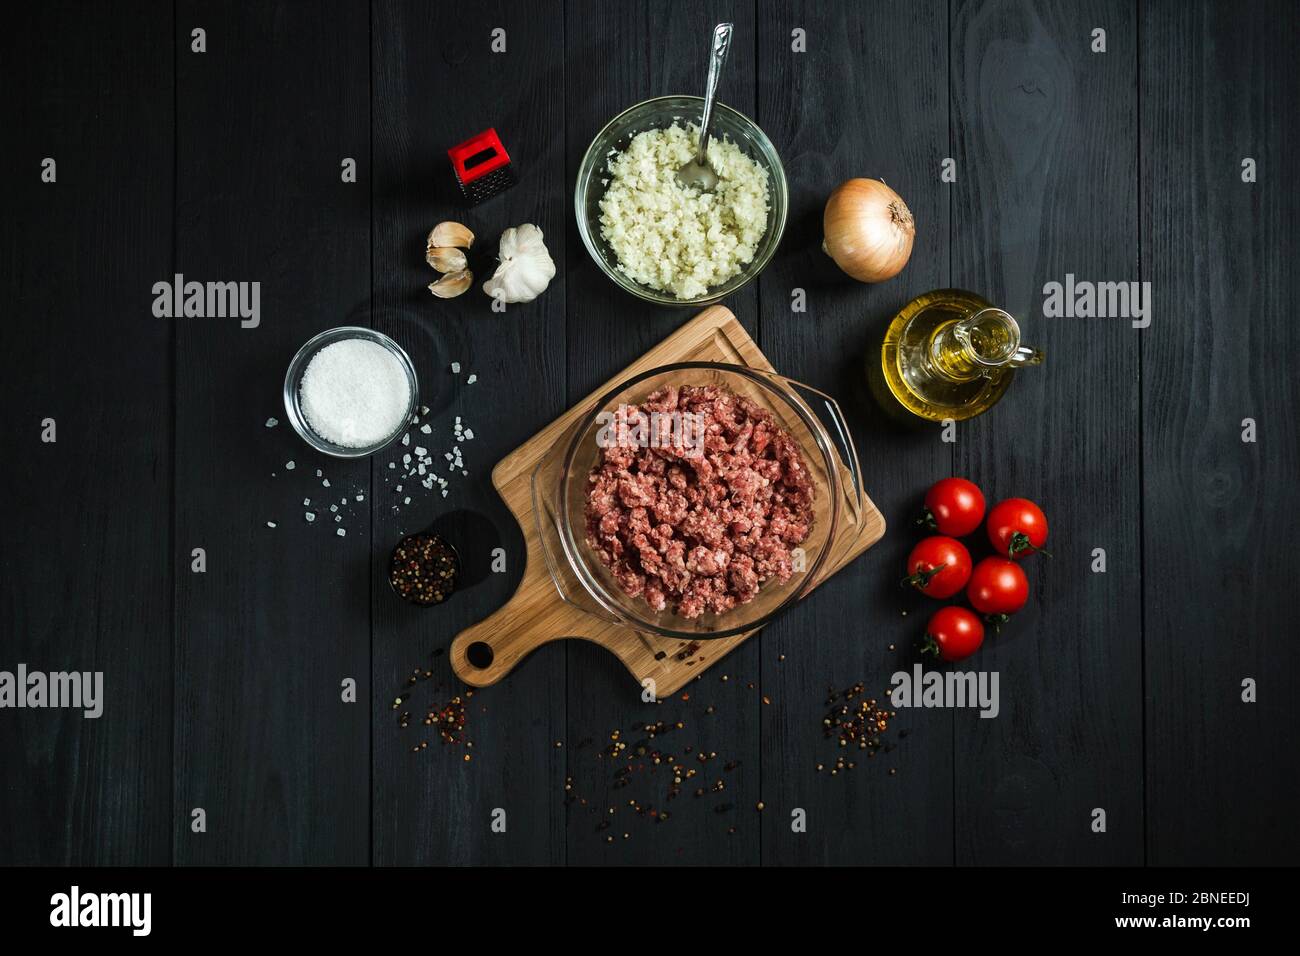 Raw minced meat with ingredients on black wooden boards. View from above. Stock Photo